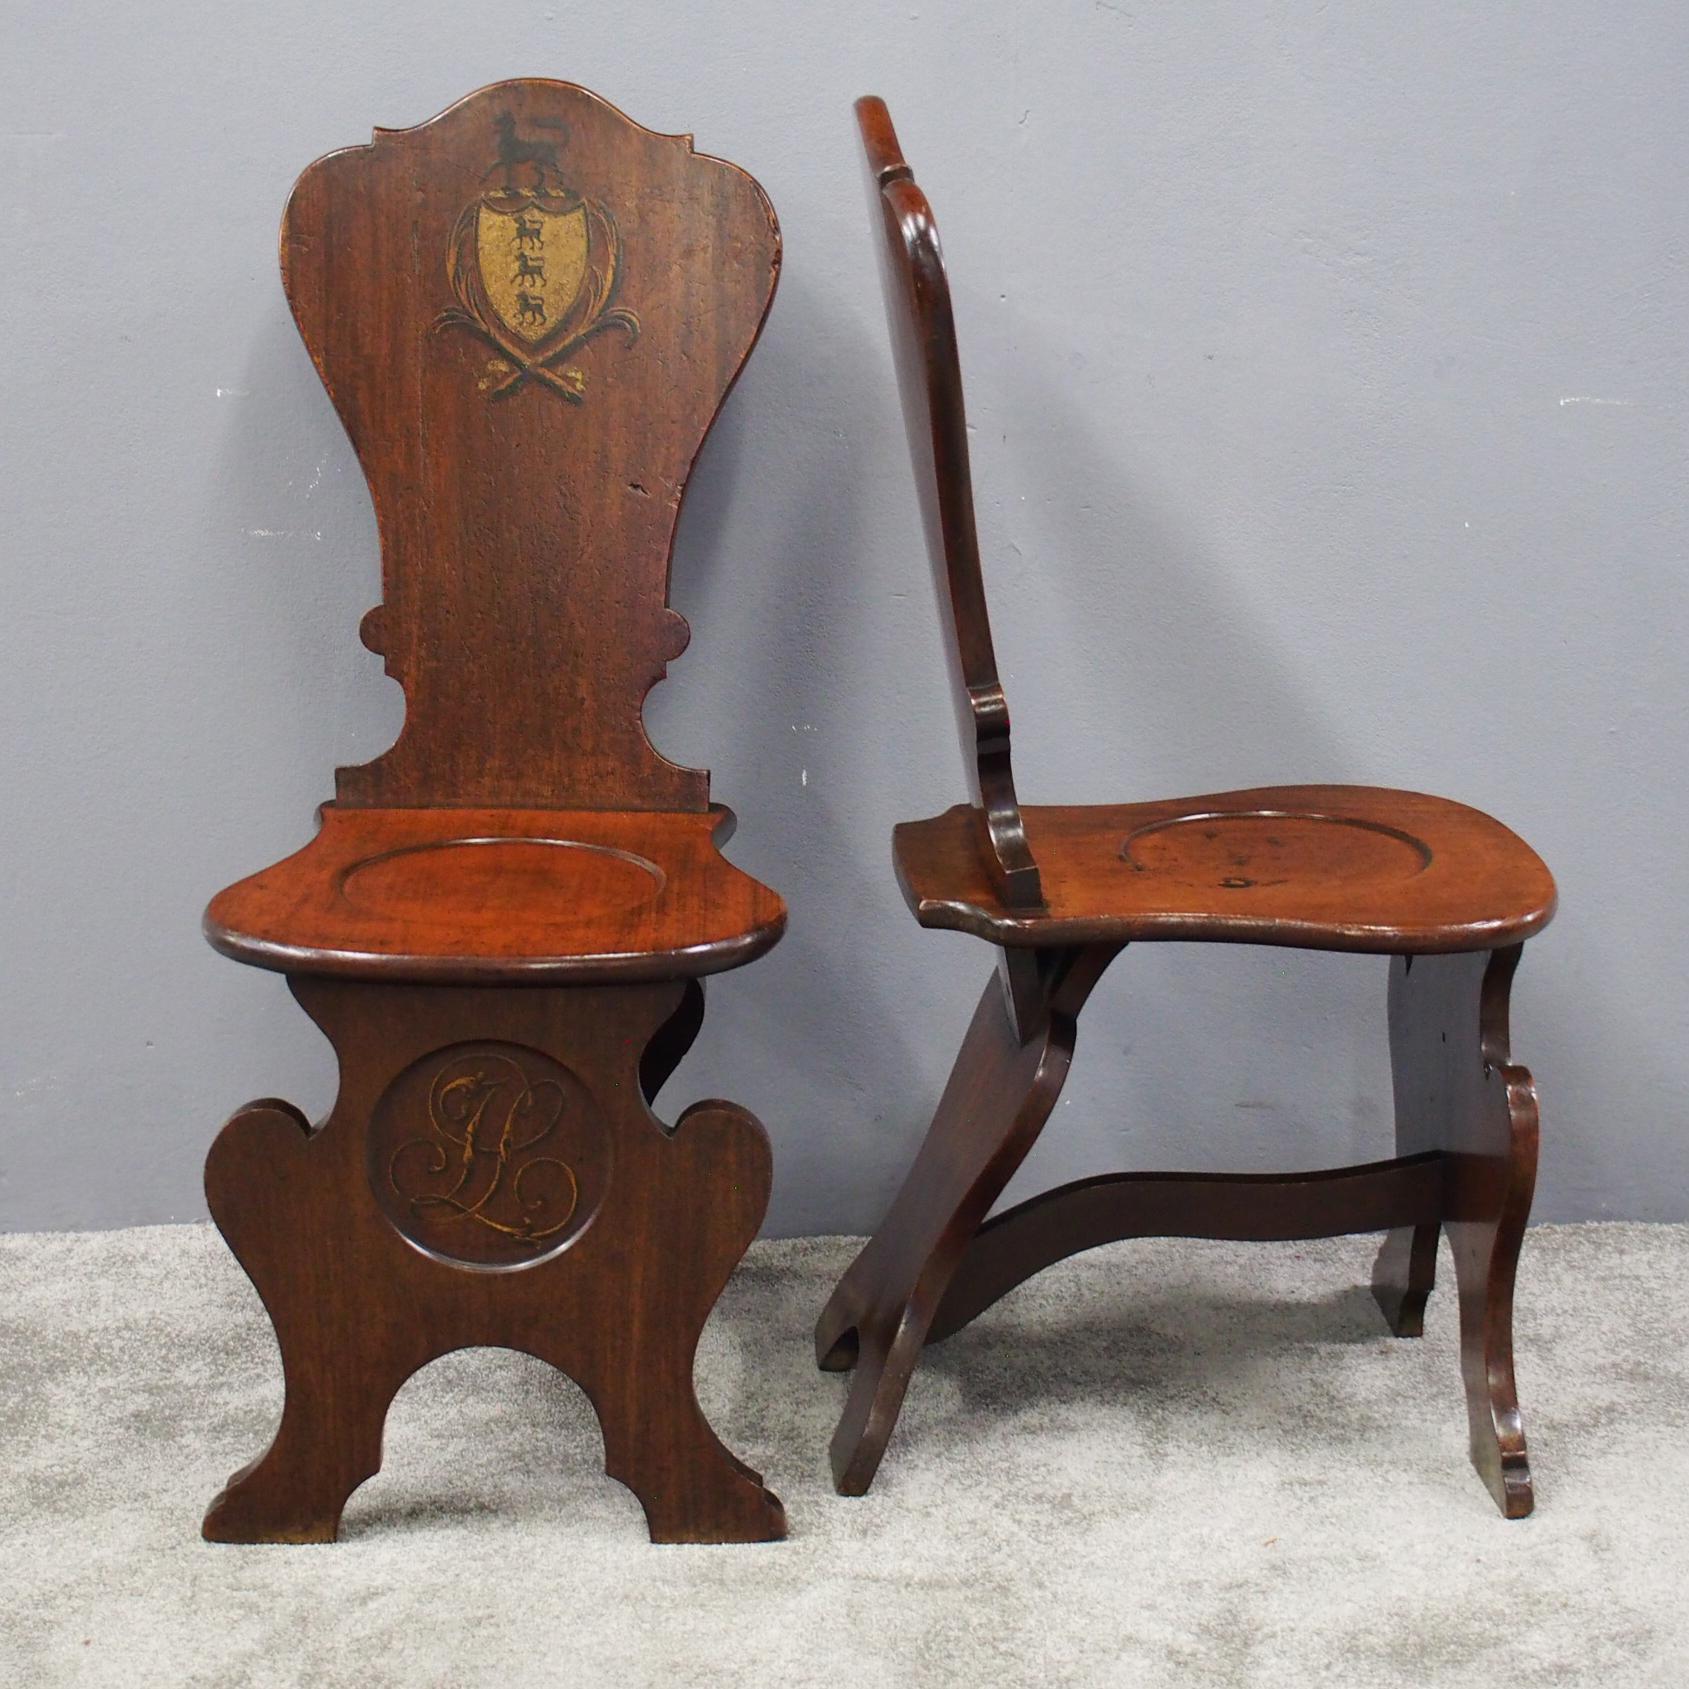 Rare pair of early George III mahogany hall chairs in the Renaissance Sgabello style, circa 1790. The tall cartouche shaped backs with hand-painted coat of arms over a solid, shaped seat with solid shaped support to the front containing a roundel